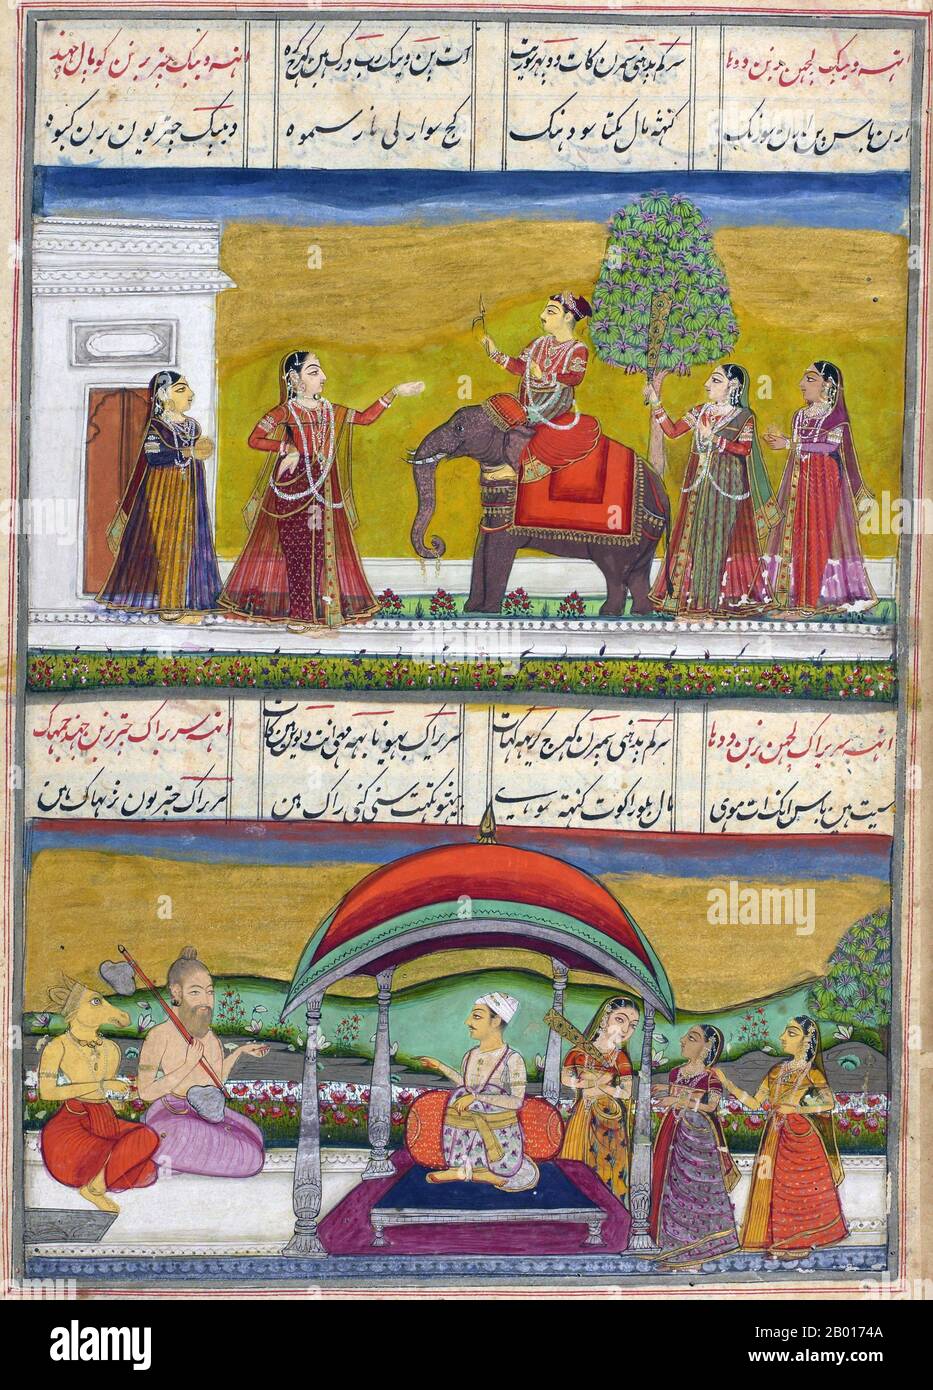 India: 'Above: Dipak Raga riding elephant, with four female attendants during Divali; Below: Sri Raga seated, with three female attendants, a musician playing a vina and a Kinnara (heavenly musician with a horse's head)'. Ragamala miniature painting, c. 1800.  Ragamala Paintings are a series of illustrative paintings from medieval India based on Ragamala or the 'Garland of Ragas', depicting various Indian musical nodes, Ragas. They stand as a classical example of the amalgamation of art, poetry and classical music in medieval India. Stock Photo